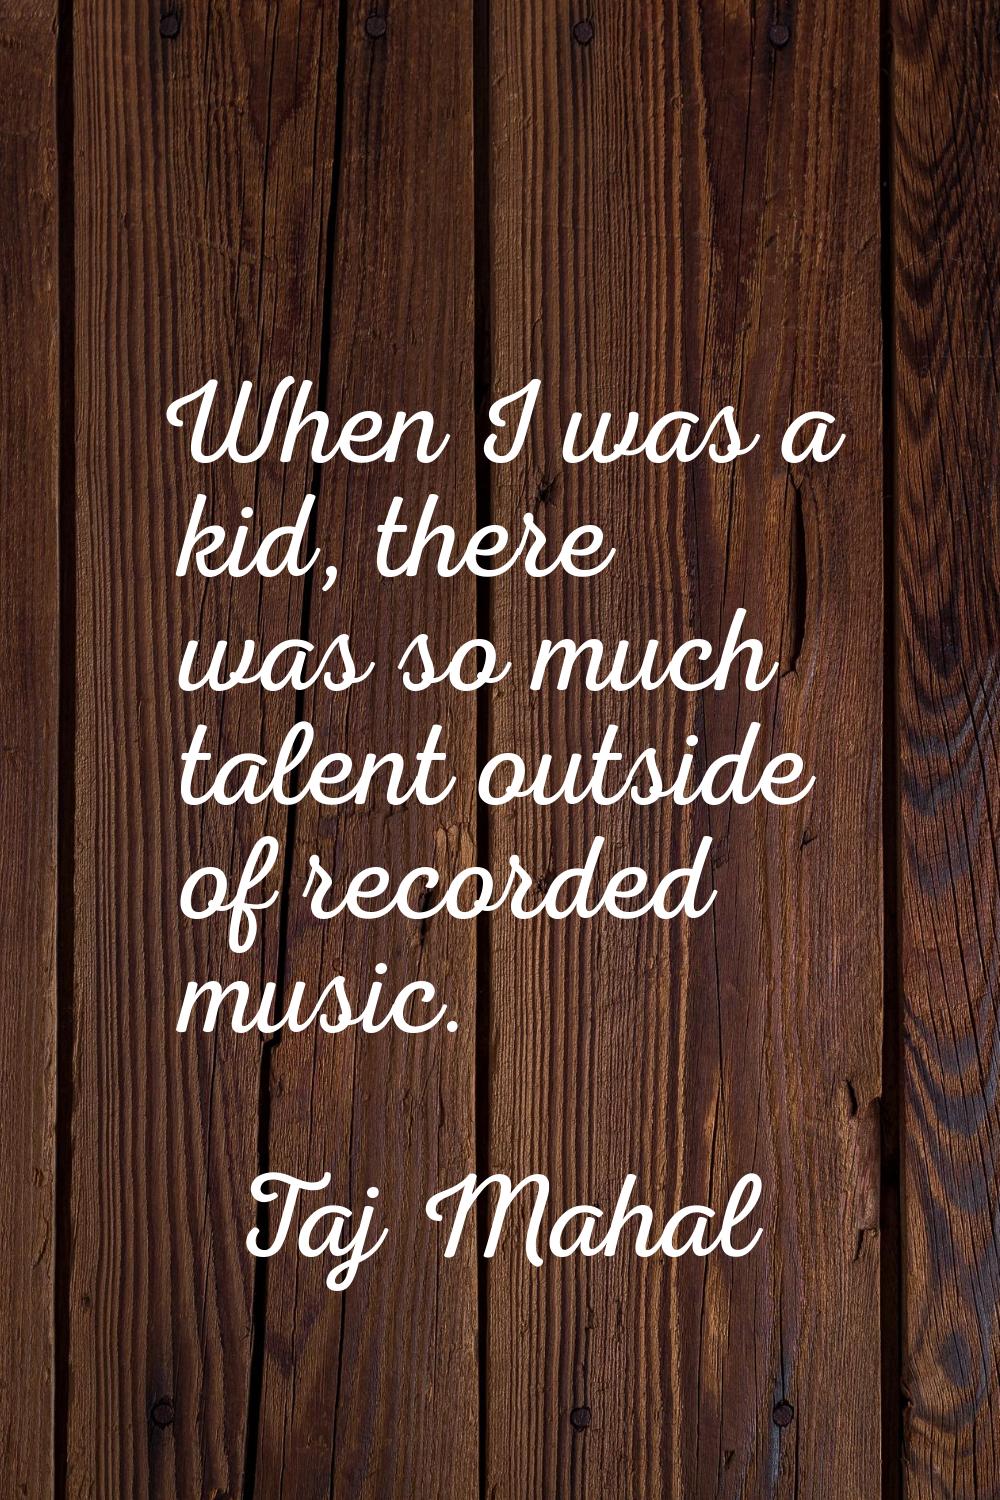 When I was a kid, there was so much talent outside of recorded music.